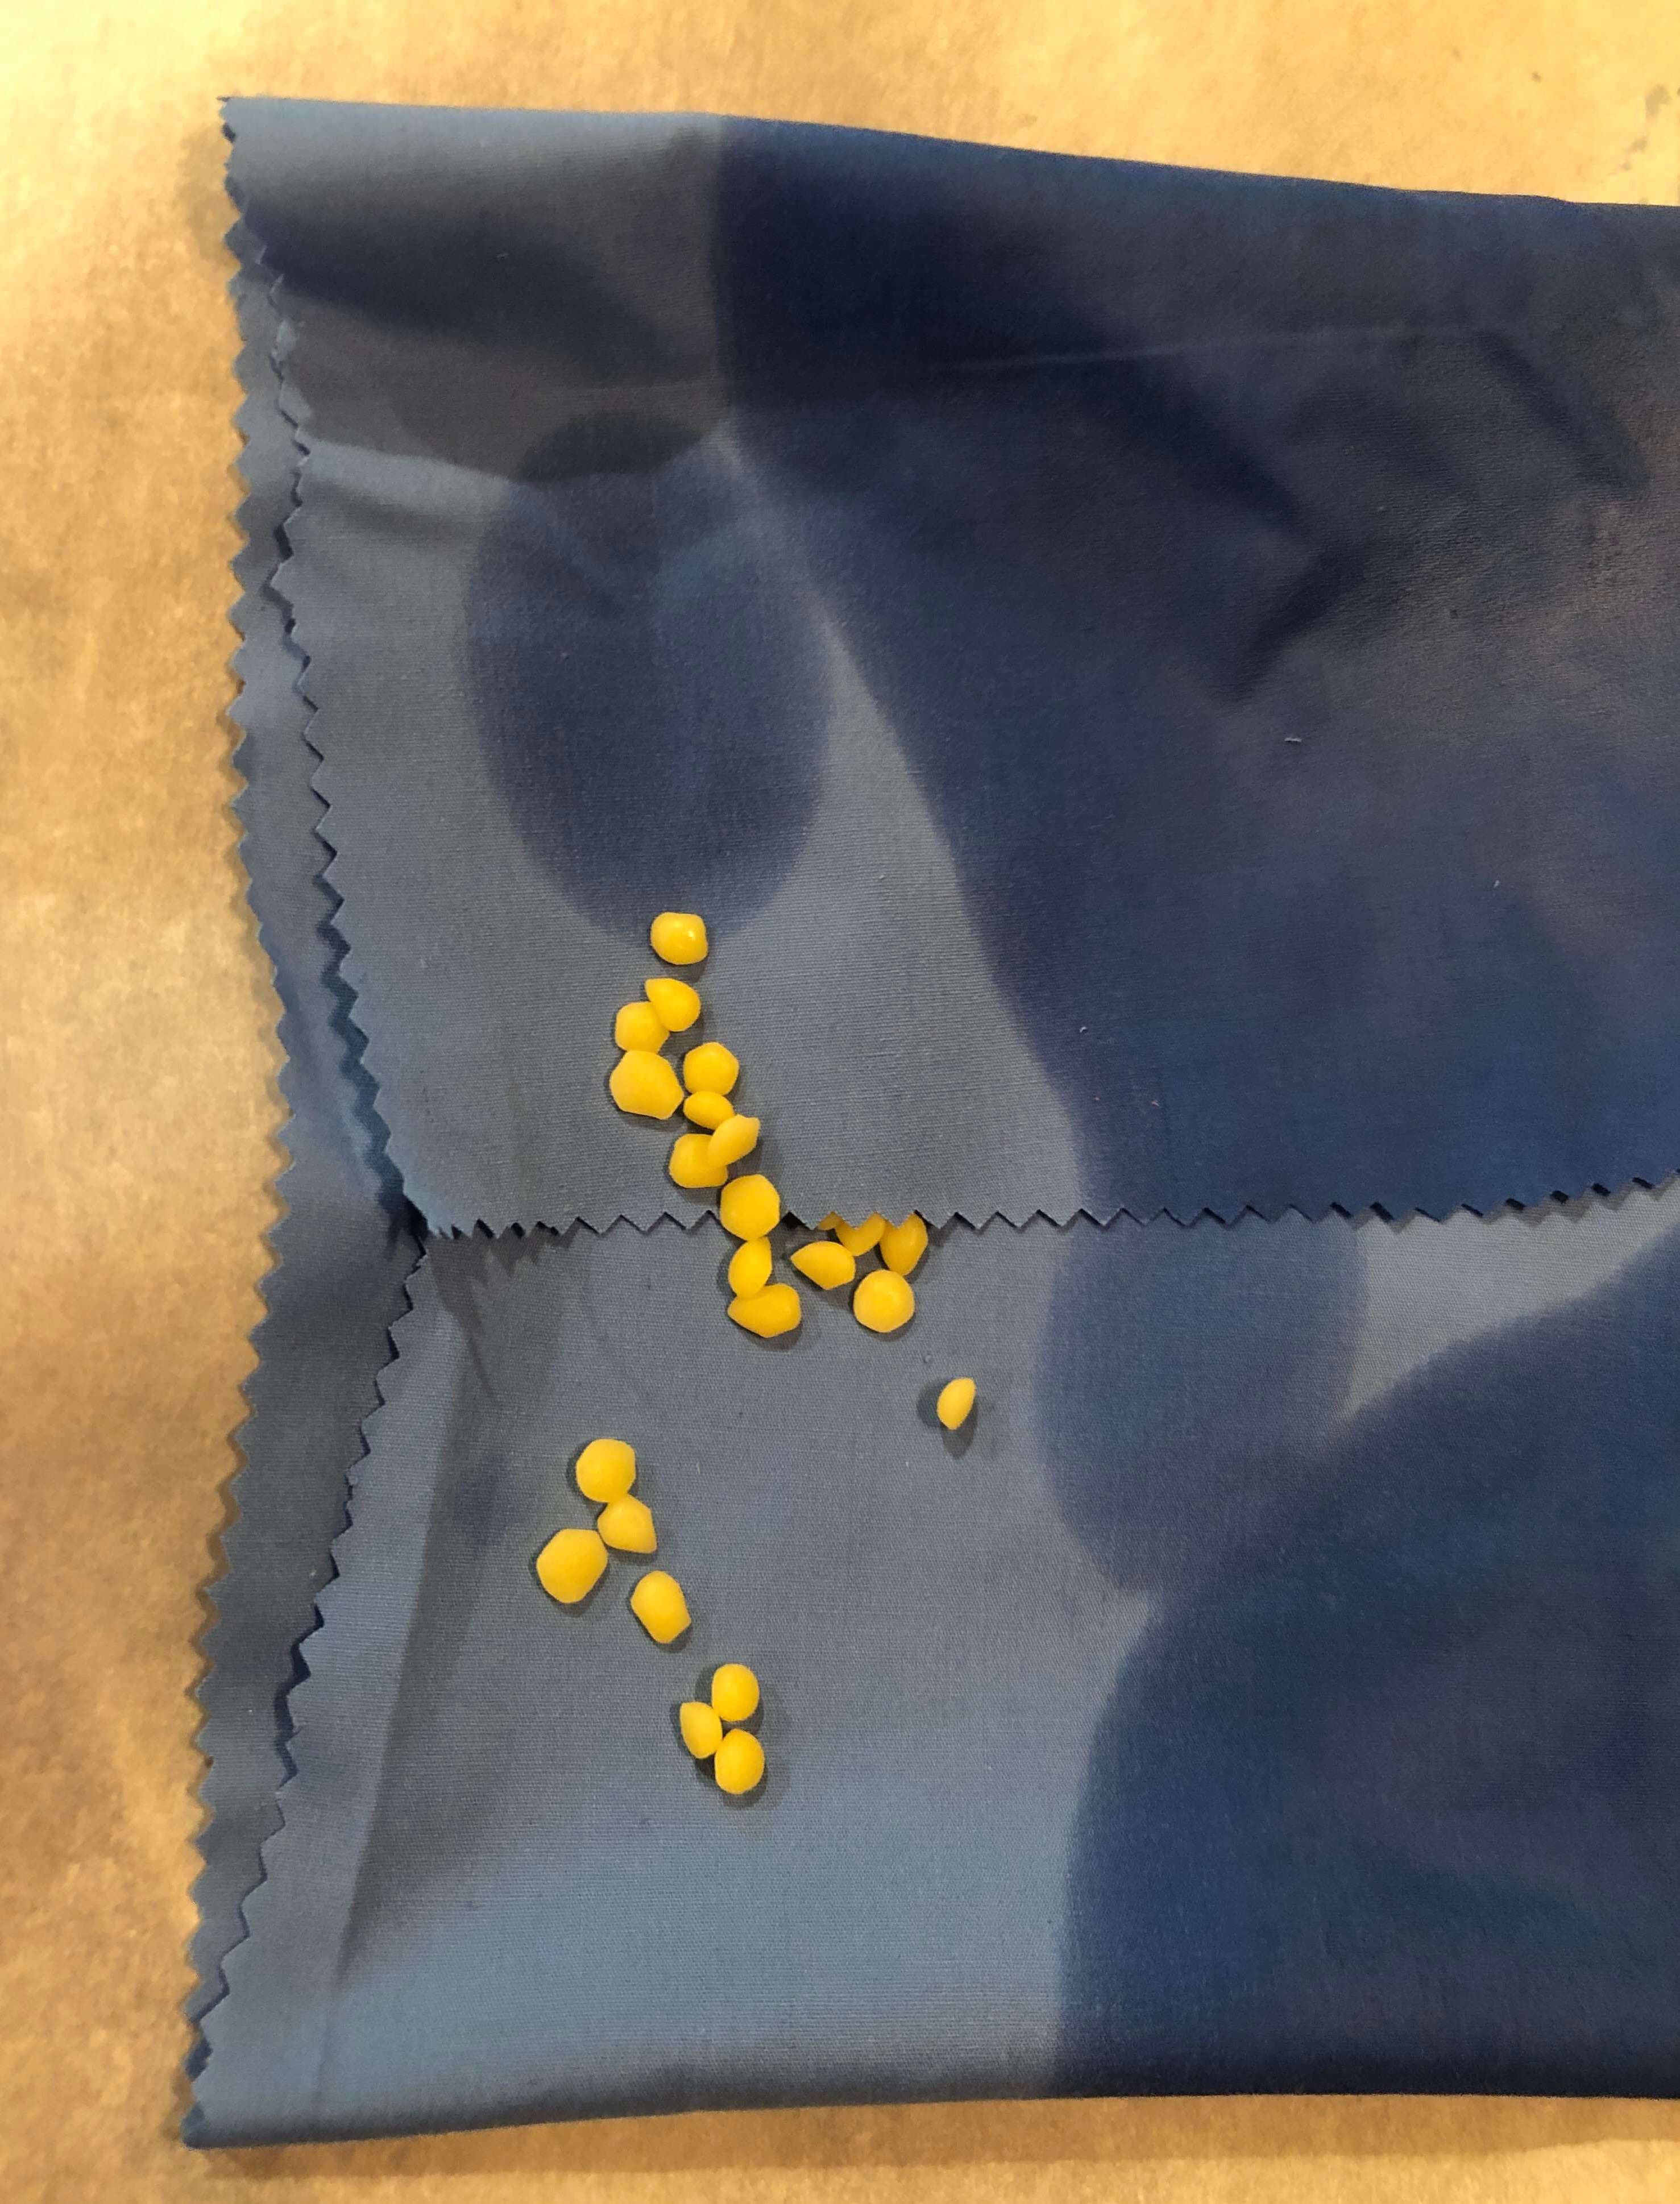 a close-up of the process of adding beeswax pellets to areas of the linen that have not been saturated